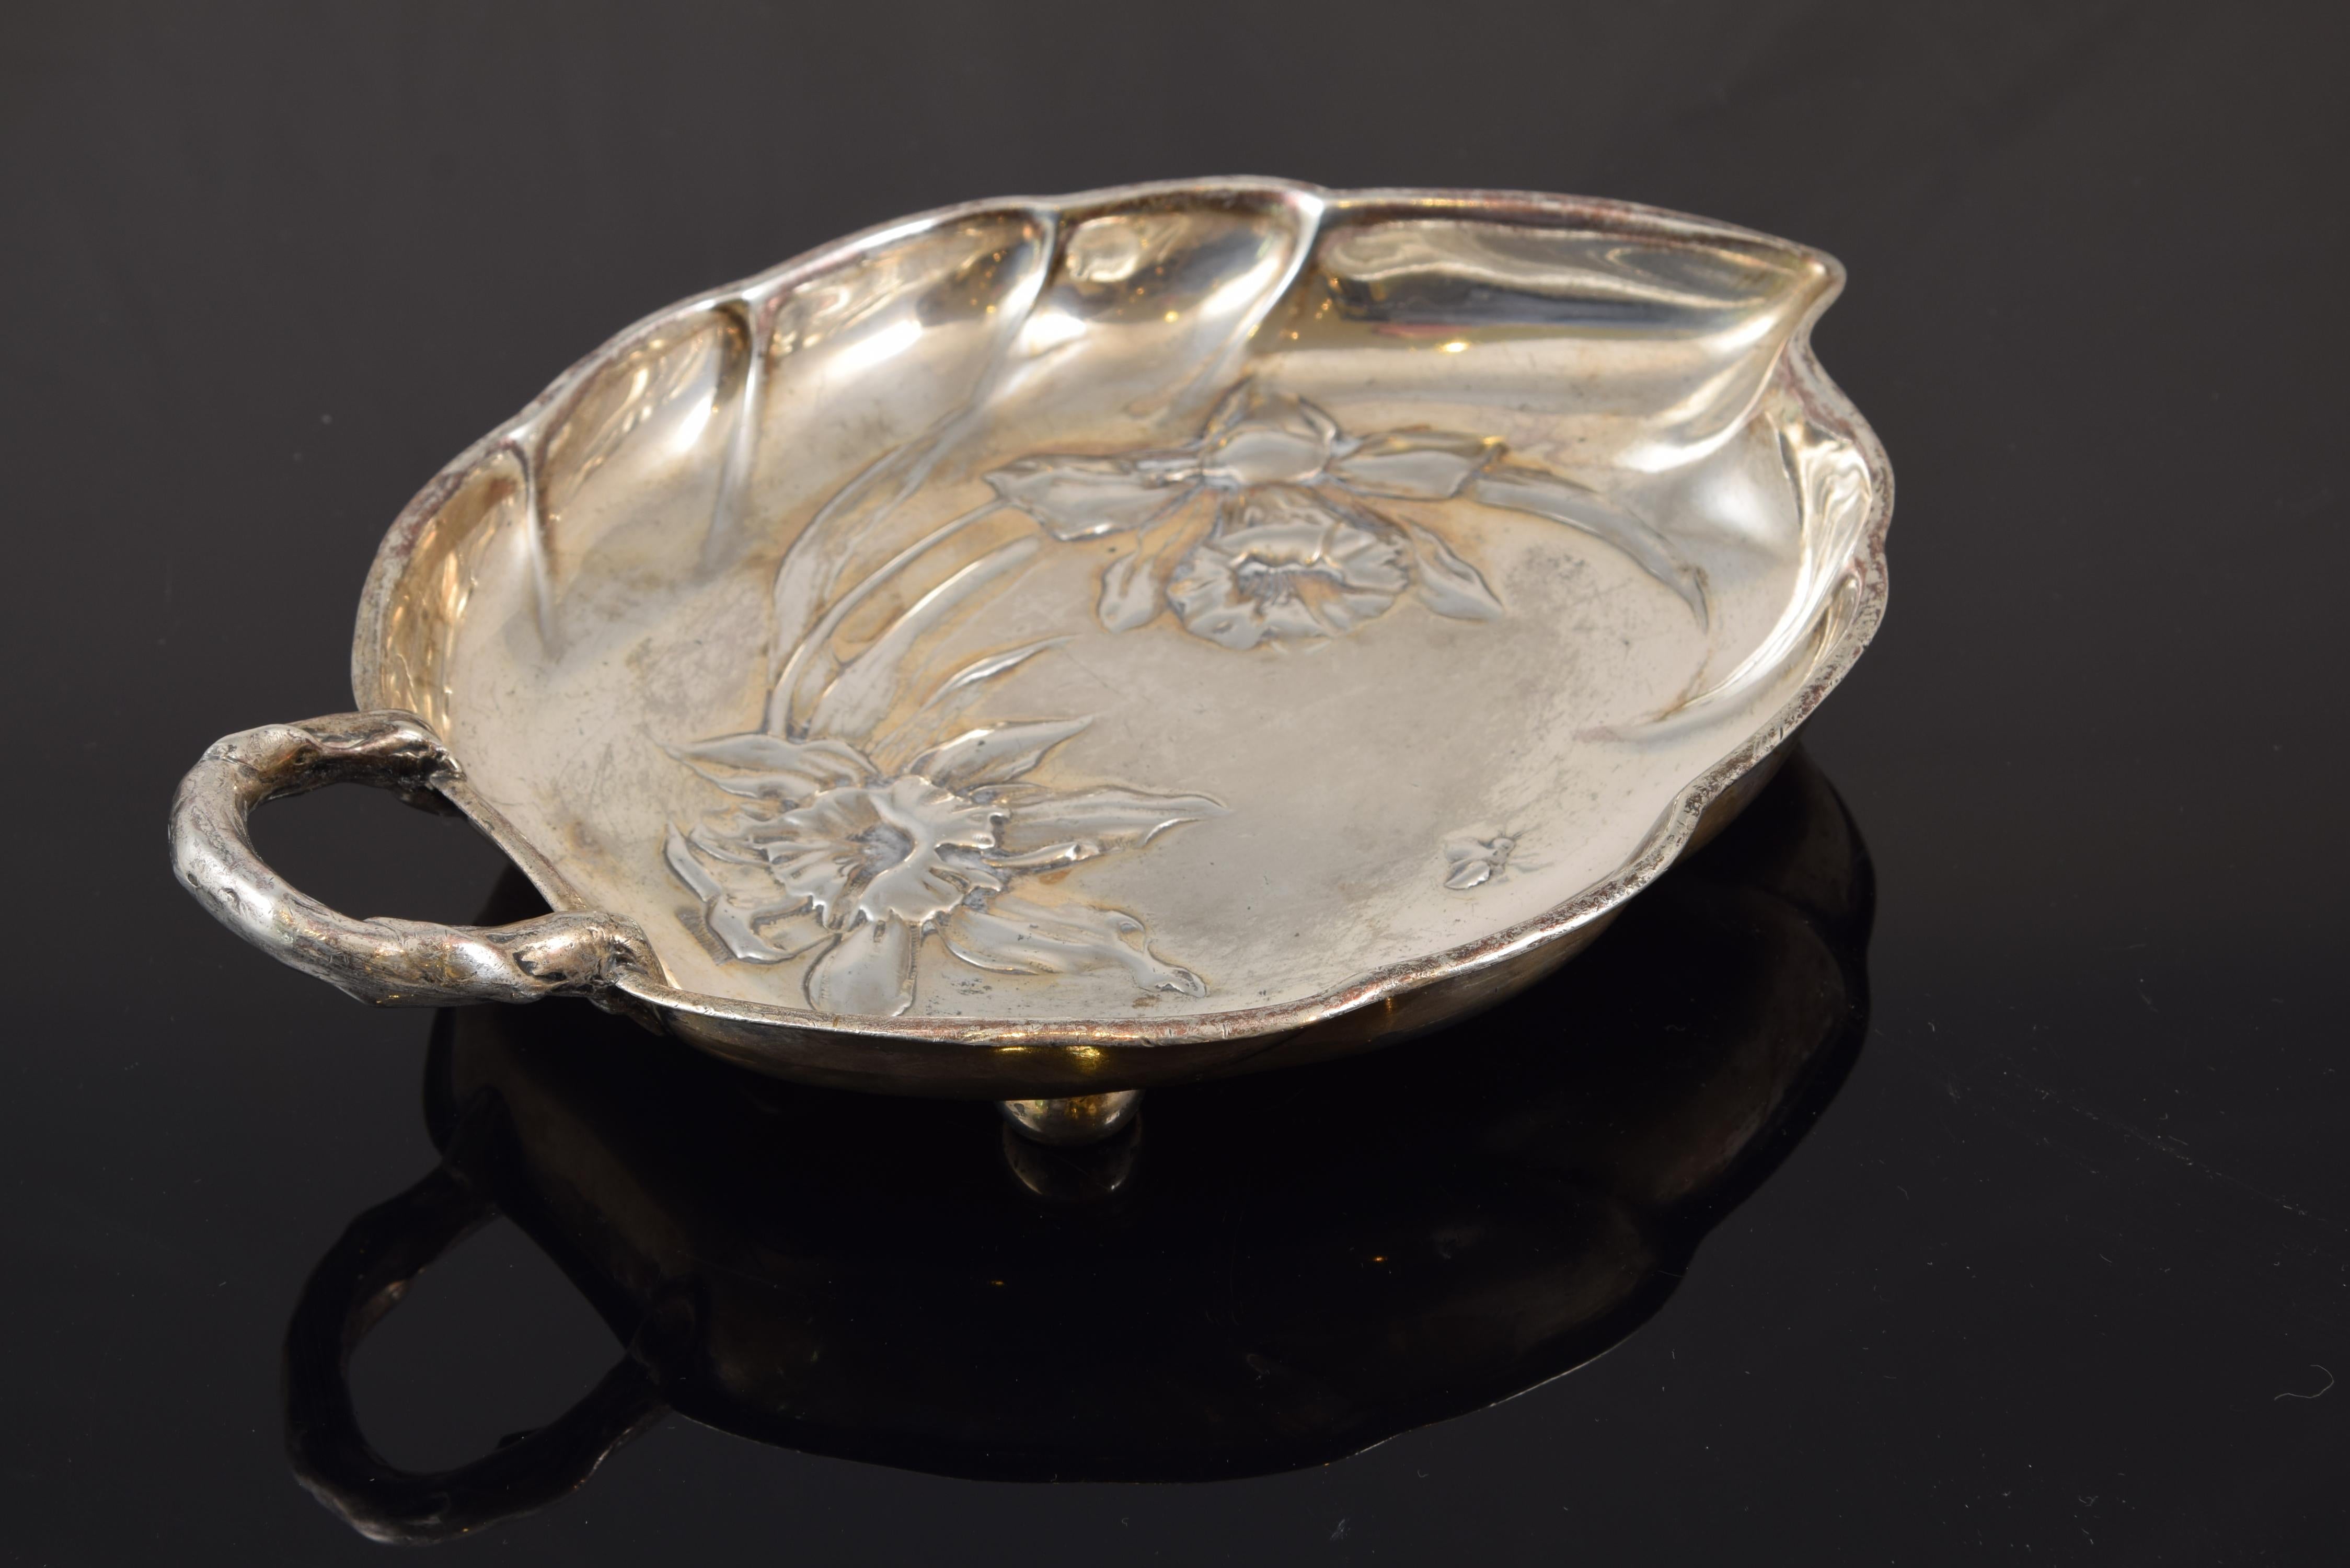 Modernist style tray (Jugendstil Art Nouveau). Pewter. Kayserzinn, Germany, around 1900.
Branded.
Raised, leaf-shaped silver pewter tray on spherical legs featuring a handle and lightly embossed floral theme decoration. Kayserzinn was born in